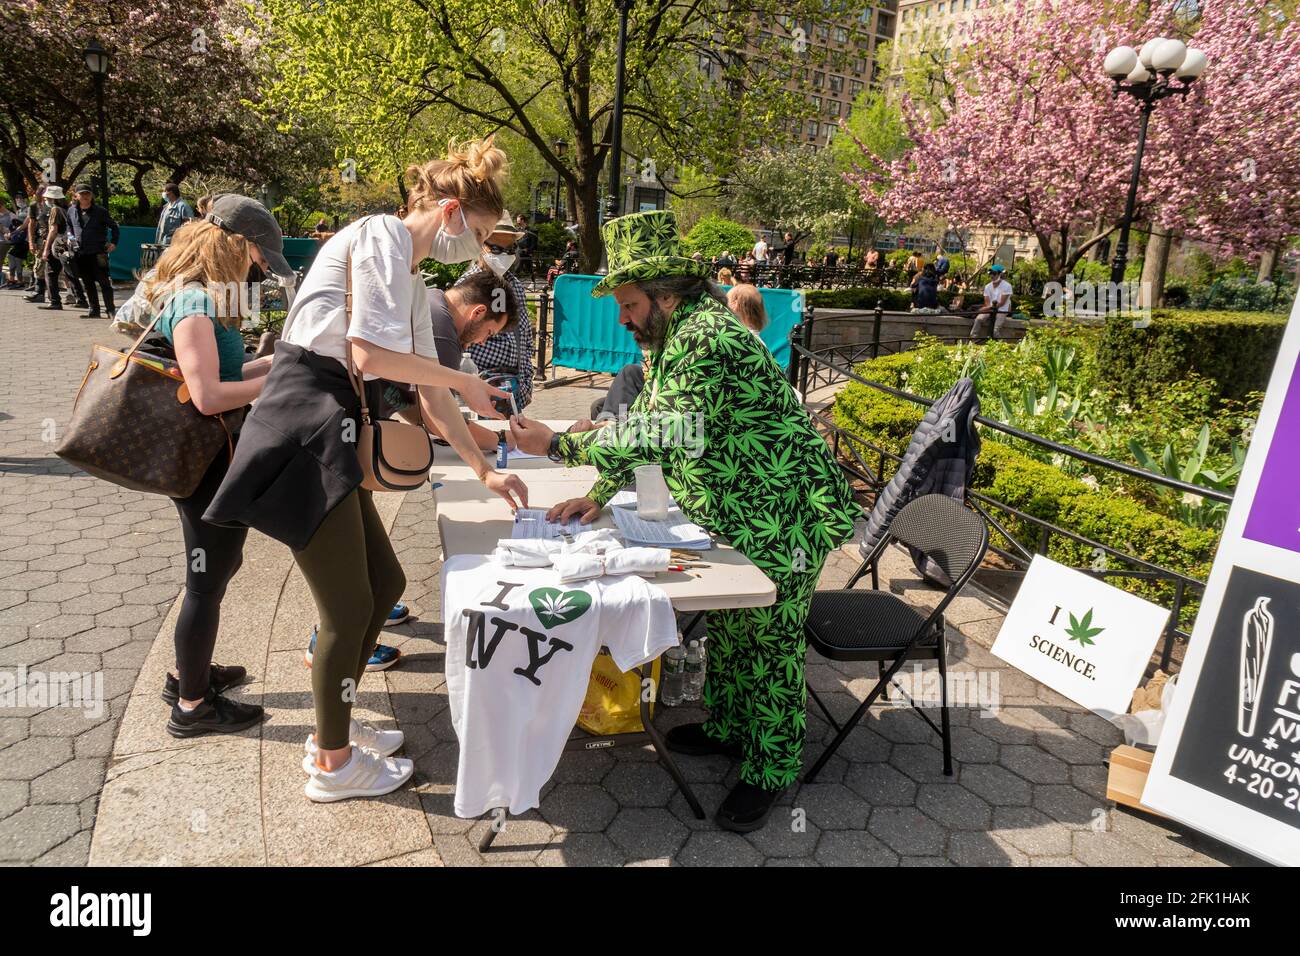 Marijuana activists distribute free joints in Union Square Park in New York on “420 Day”, Tuesday, April 20, 2021. The activists were celebrating the legalization of marijuana in New York by distributing the joints upon presentation of proof of COVID-19 vaccination. (© Richard B. Levine) Stock Photo